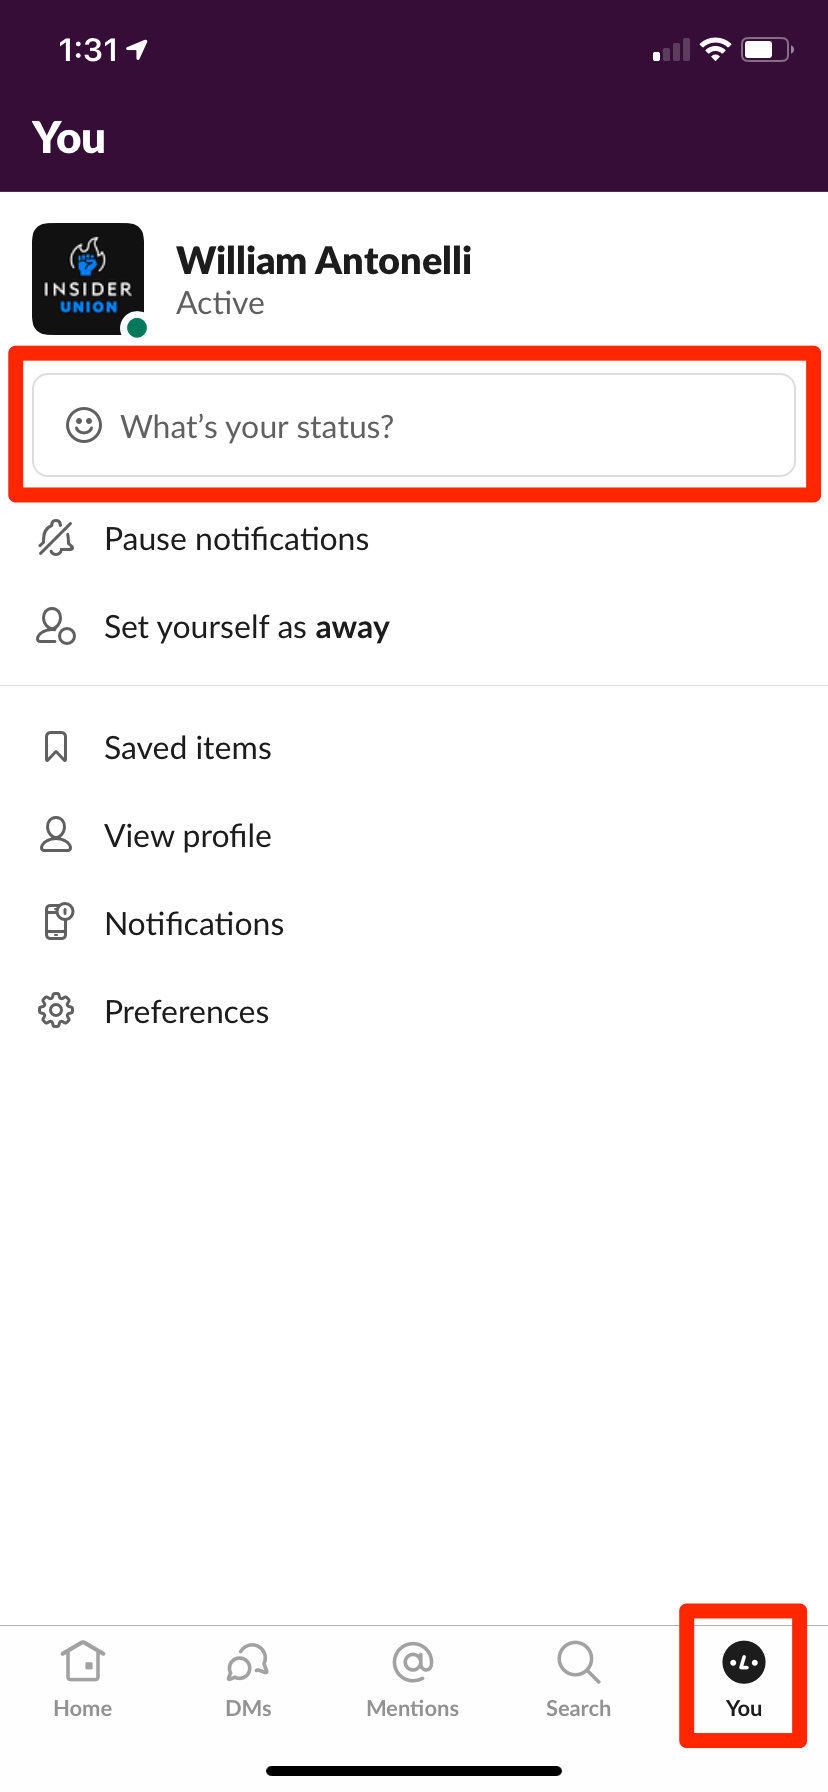 A Slack mobile app's "You" menu, with the You icon and the status update option highlighted.